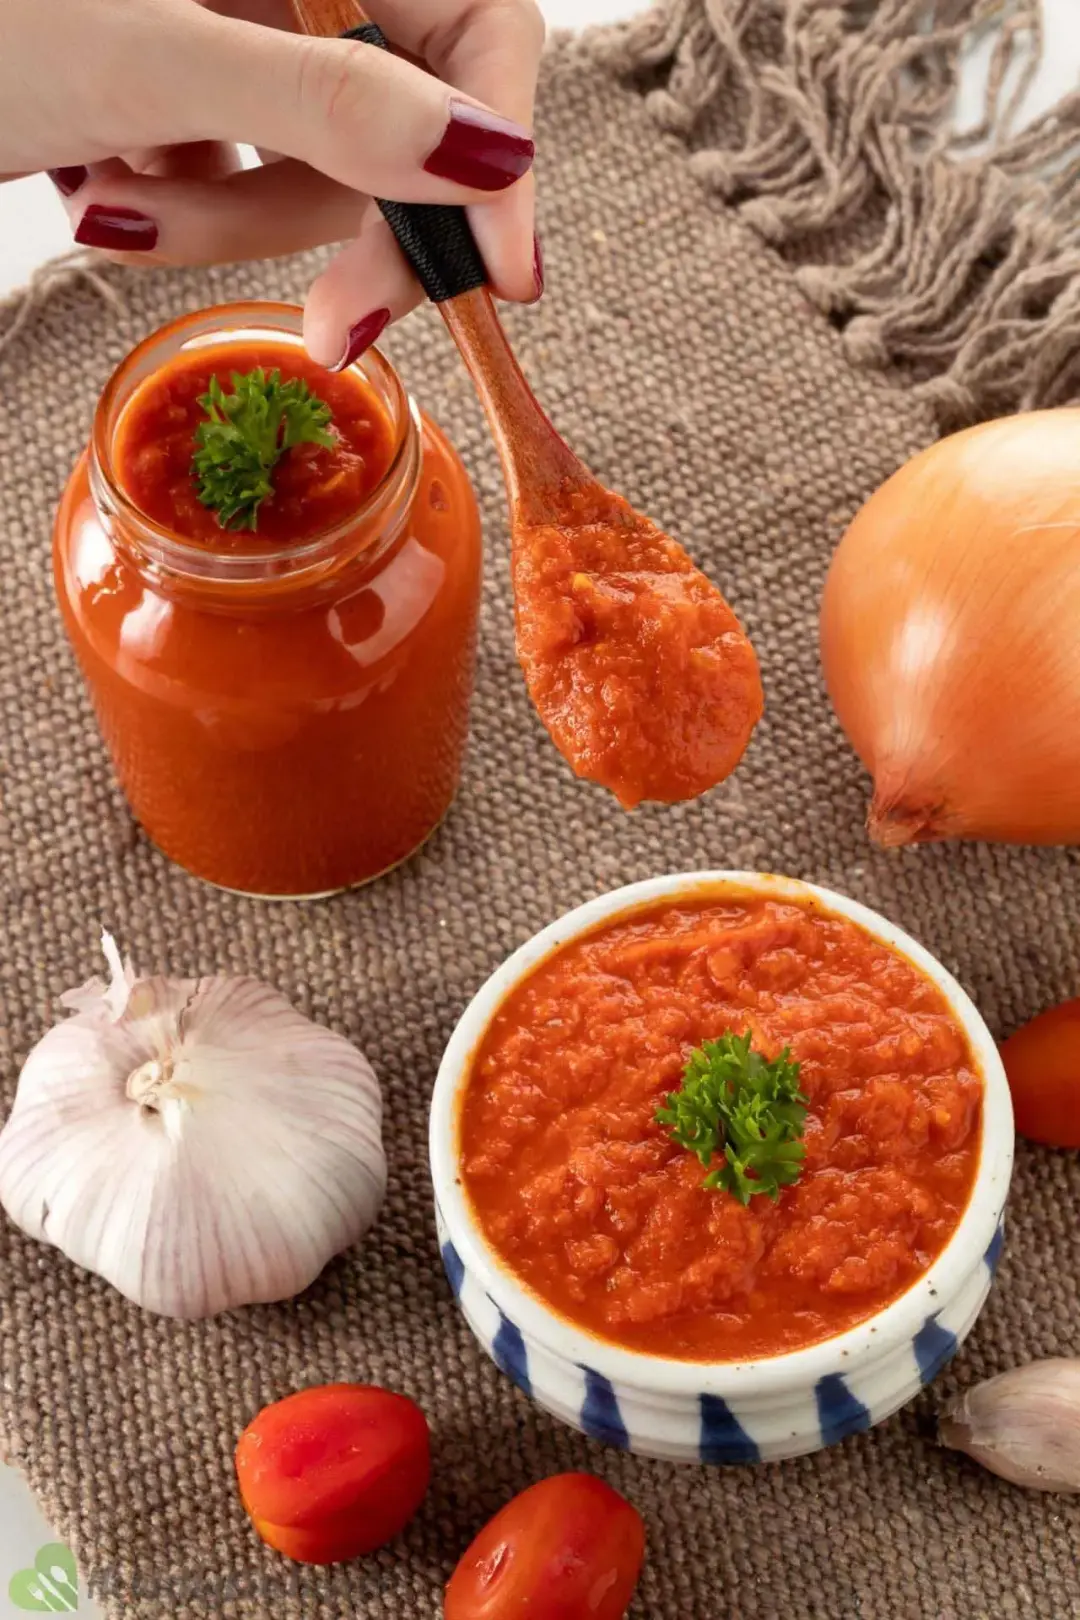 What Are the Best Tomatoes for Tomato Sauce